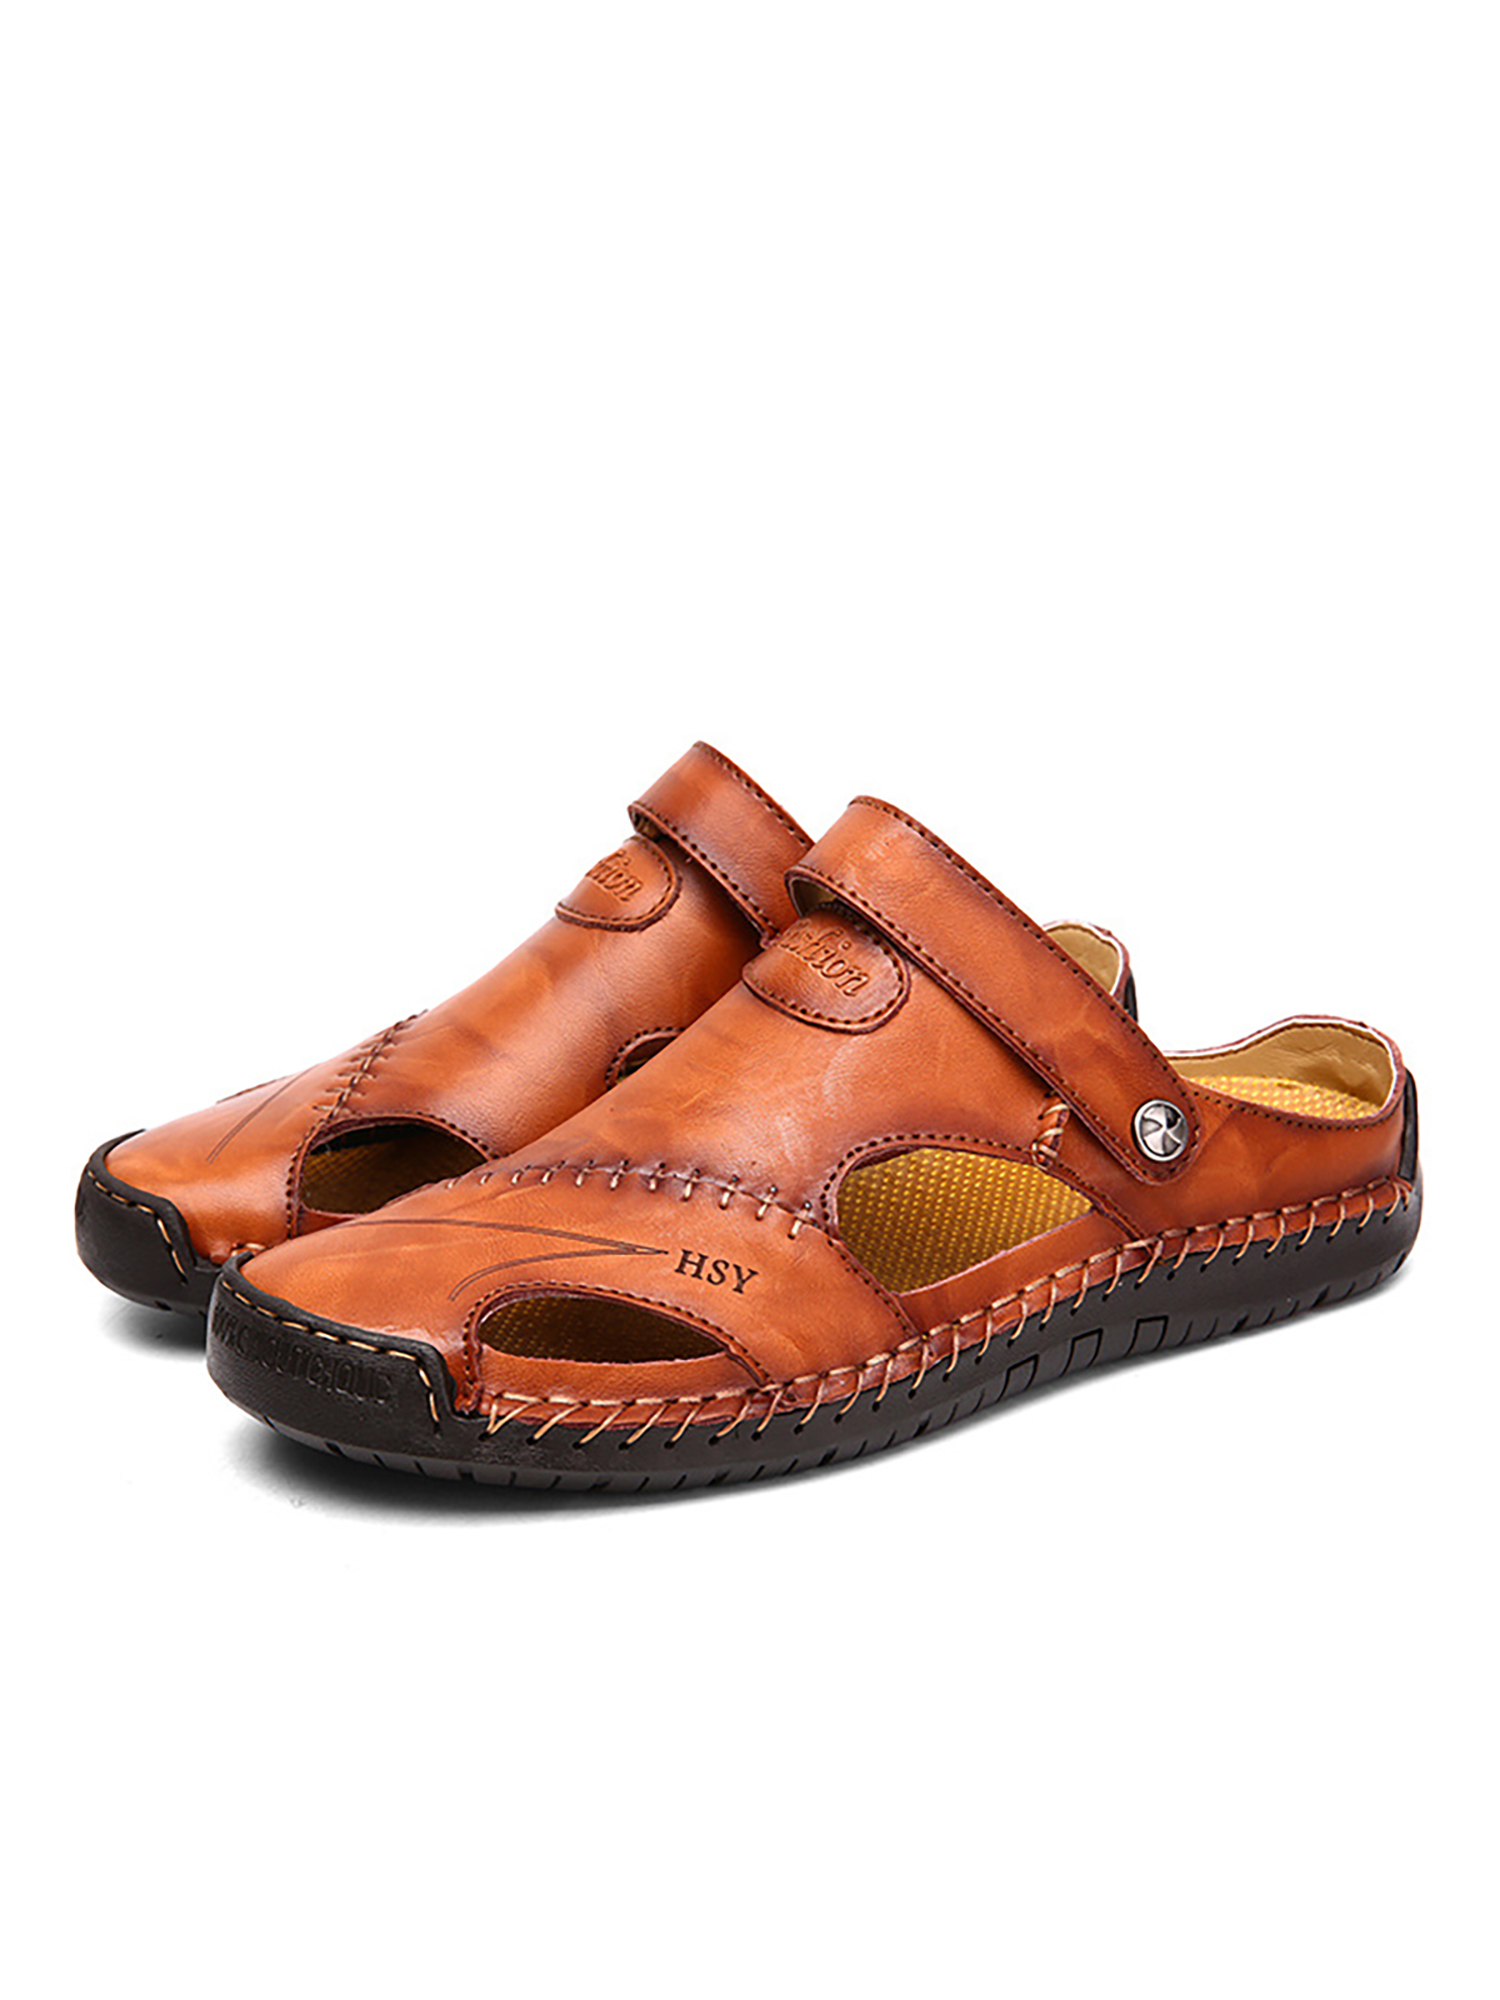 Avamo Mens Beach Sandals Leather Shoes Casual Summer Clogs Shoes Fashion Men Slippers - image 3 of 5